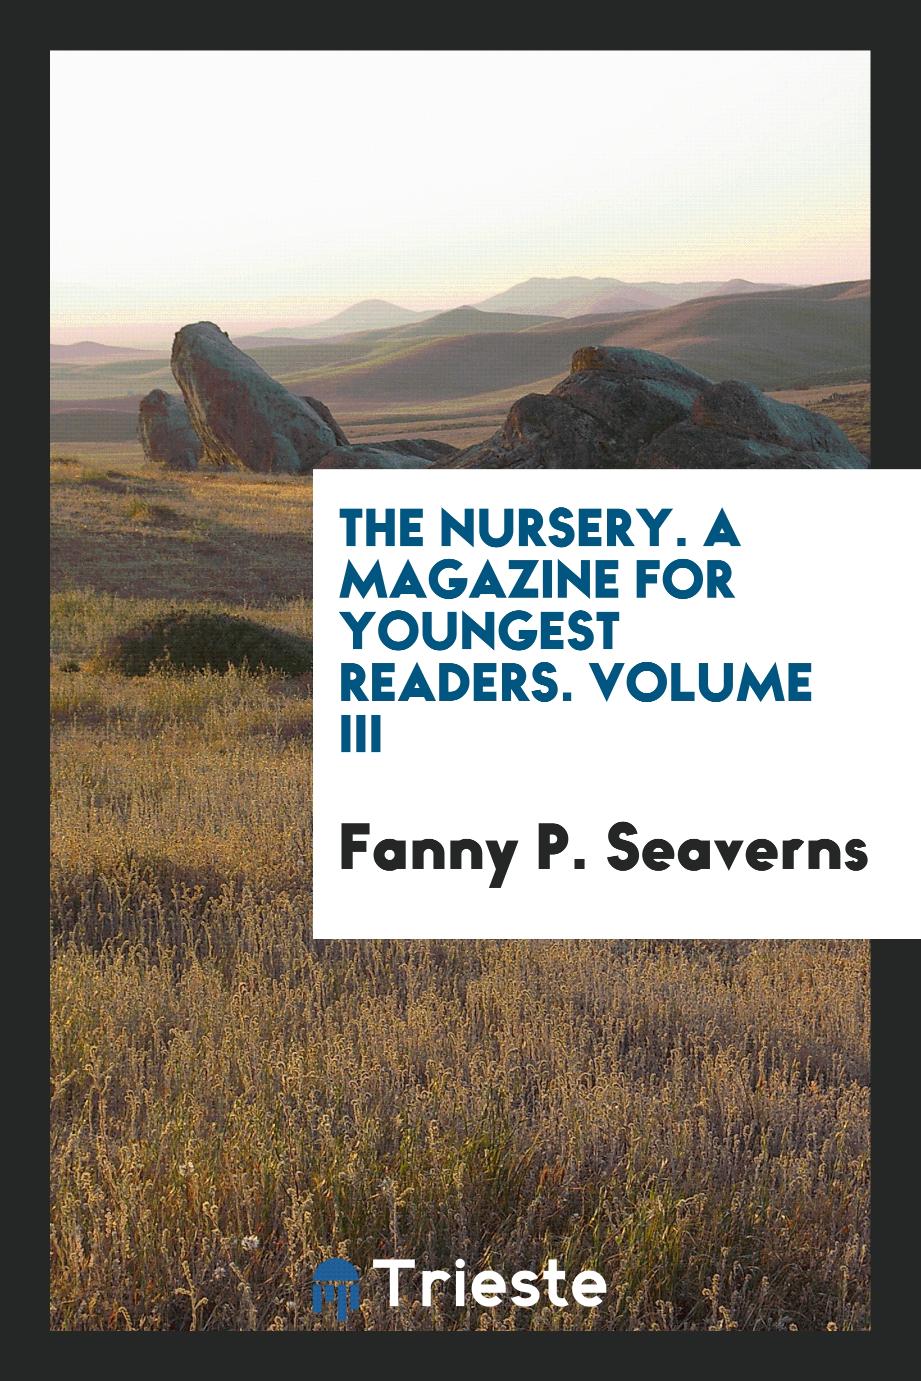 The Nursery. A Magazine for Youngest Readers. Volume III